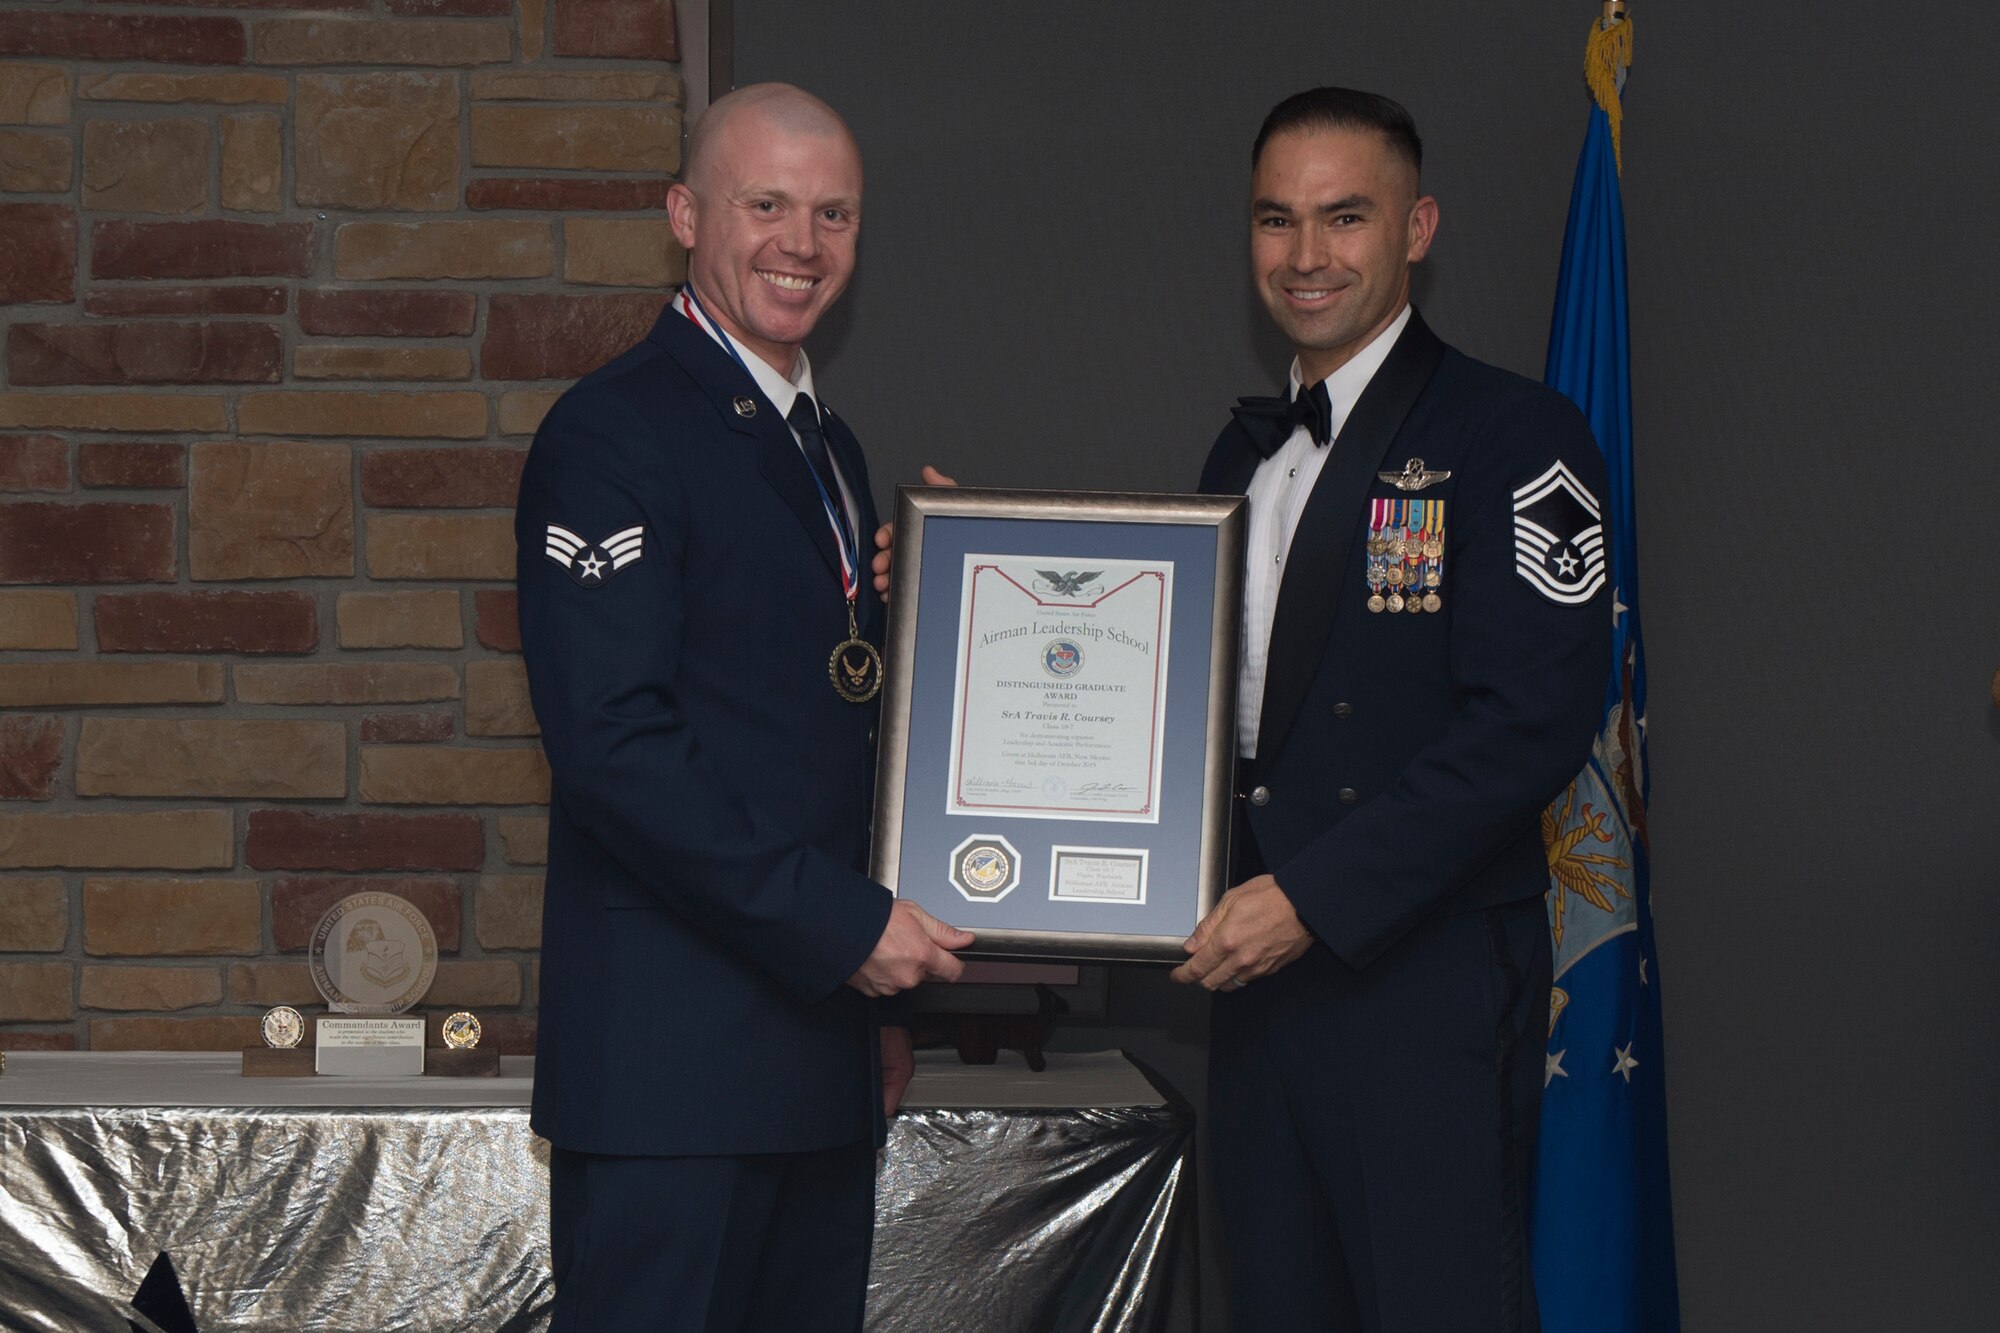 Senior Airman Travis Coursey, Airman Leadership School graduate, accepts the distinguished graduate award during the graduation of ALS class 19-7, October 10, 2019, on Holloman Air Force Base, N.M. The distinguished graduate award is presented to the top ten-percent of graduates for their performance in academic evaluations and demonstration of leadership. (U.S. Air Force photo by Airman 1st Class Kristin Weathersby)